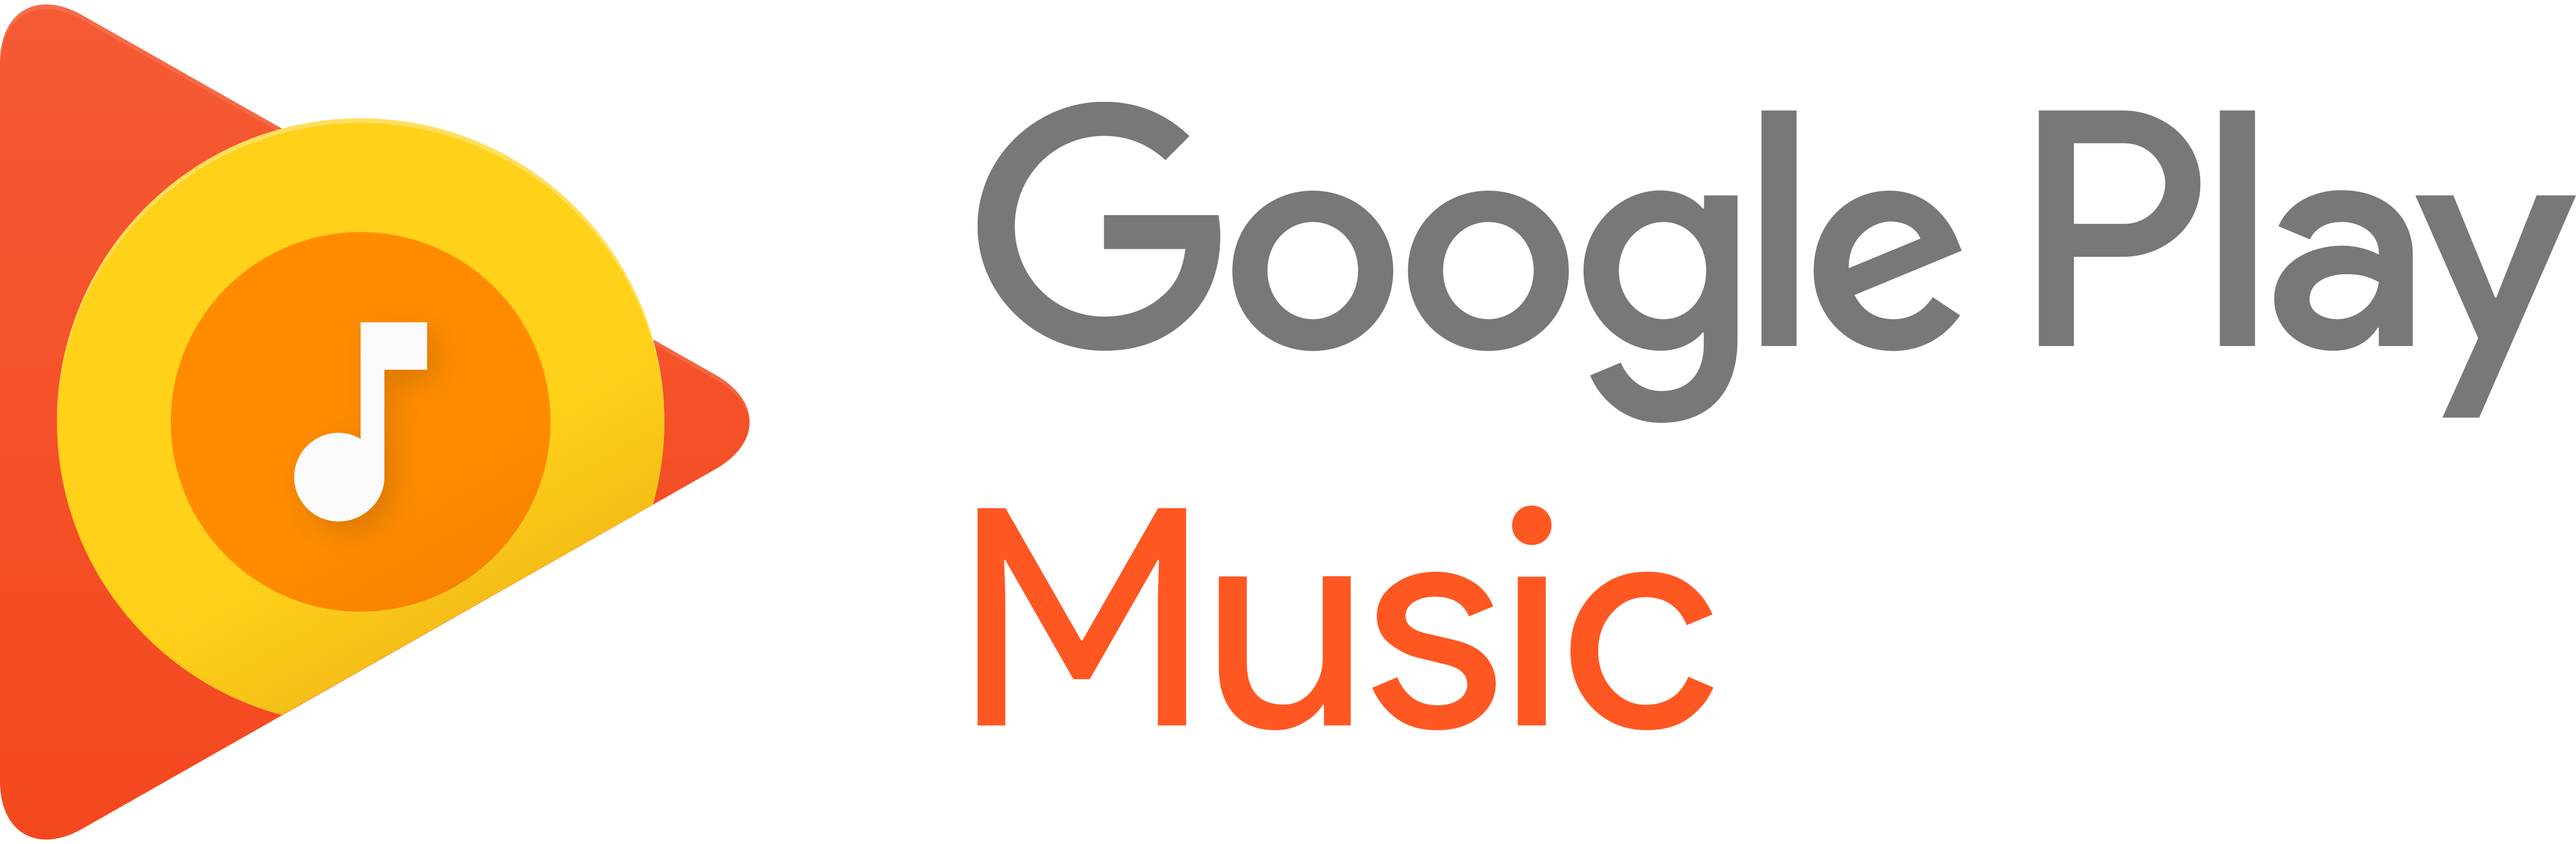 Samsung Make Google Play Their Default Music Service with Plenty of Perks